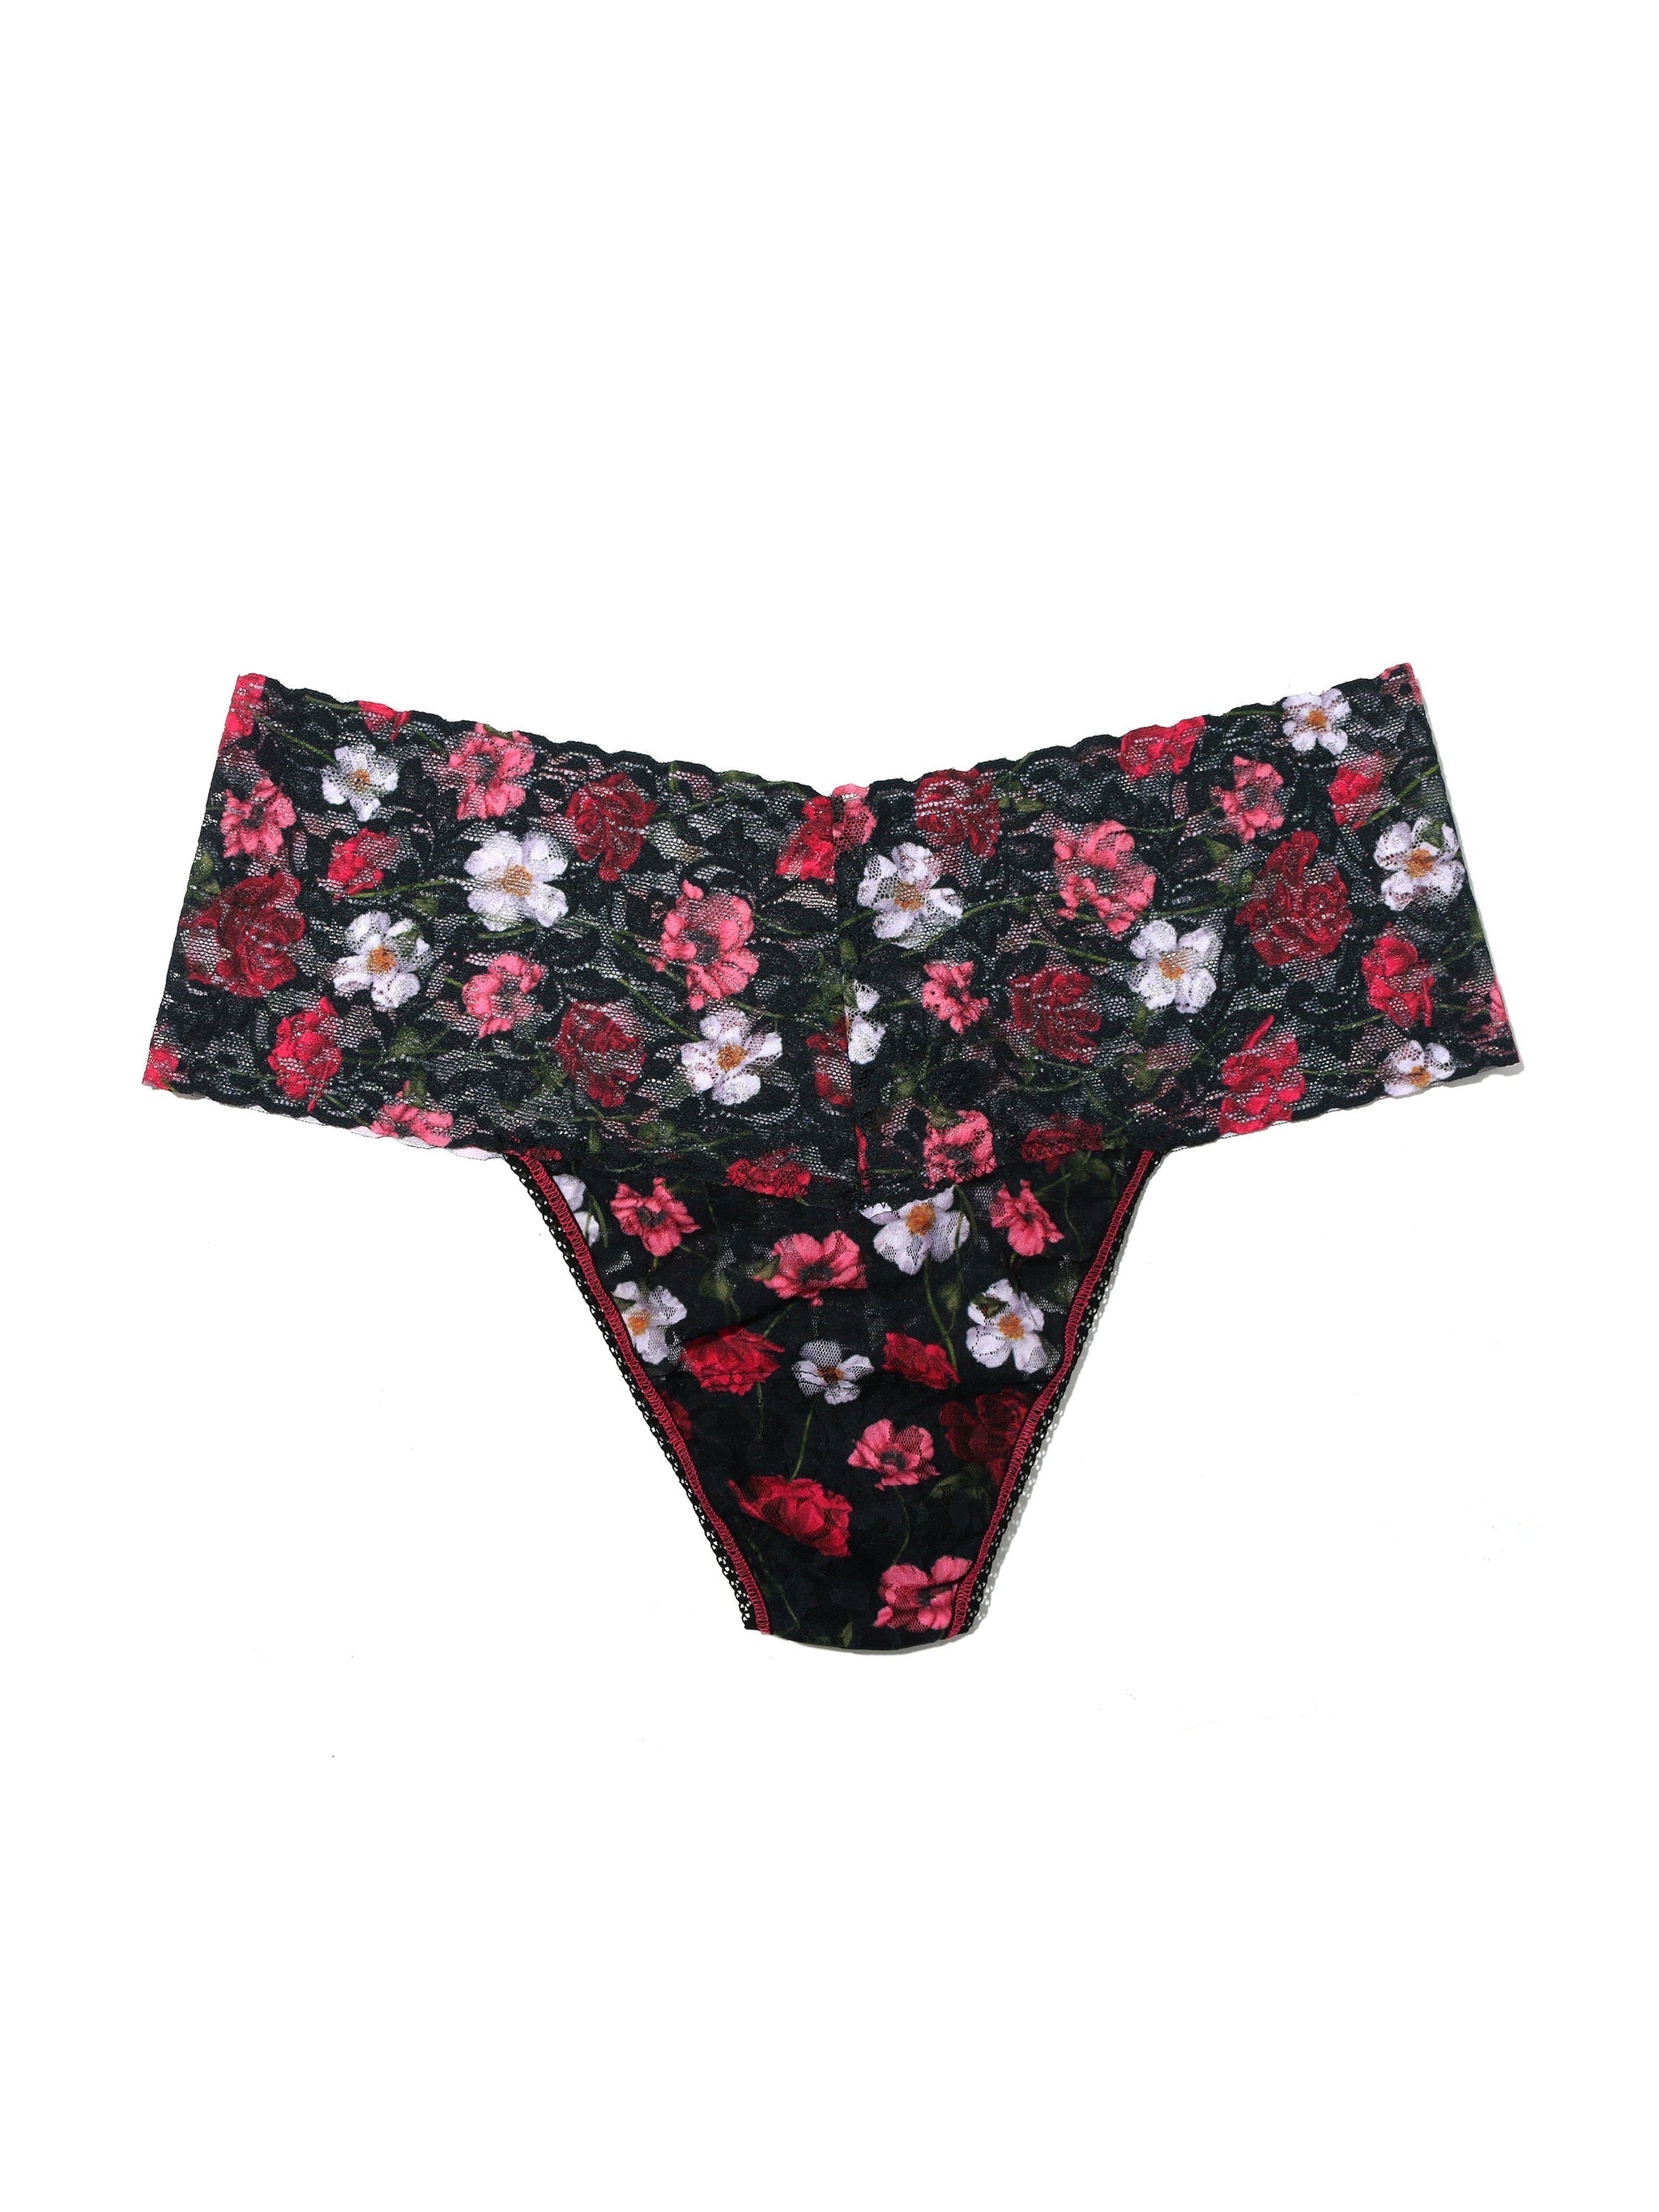 YOU REGINA Floral Print Cotton Hanky Panky Thong Sale With G Strings Sexy  Lingerie For Women From Dou04, $9.29